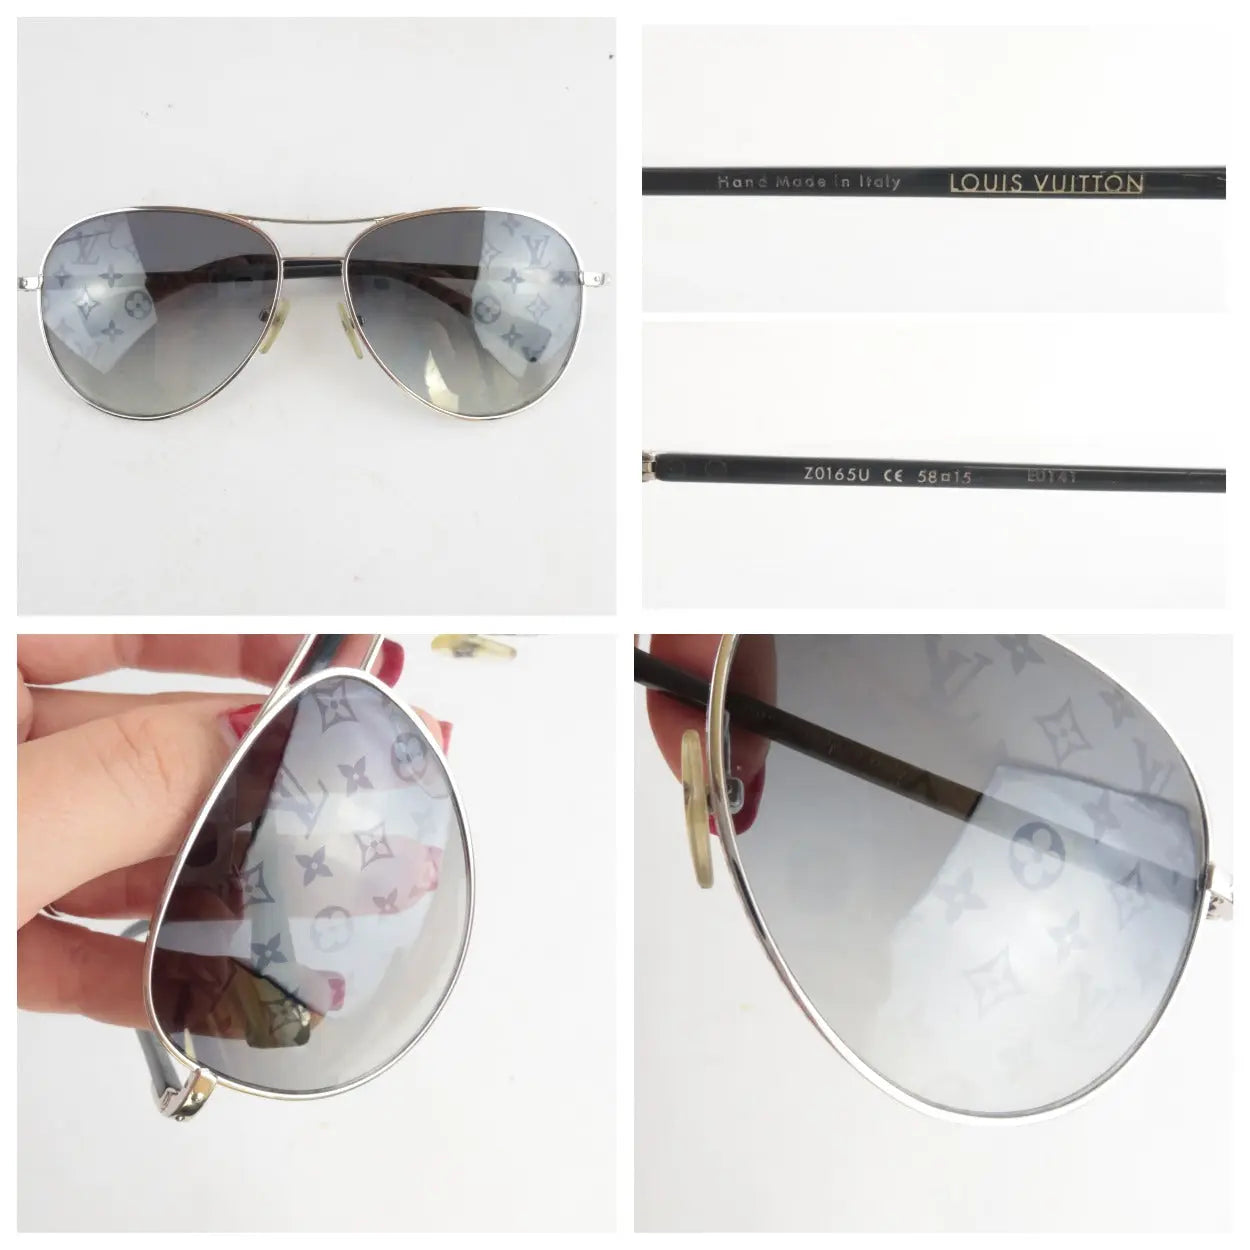 Pin by Tay on Frames  Louis vuitton sunglasses, Louis vuitton evidence  sunglasses, Louis vuitton